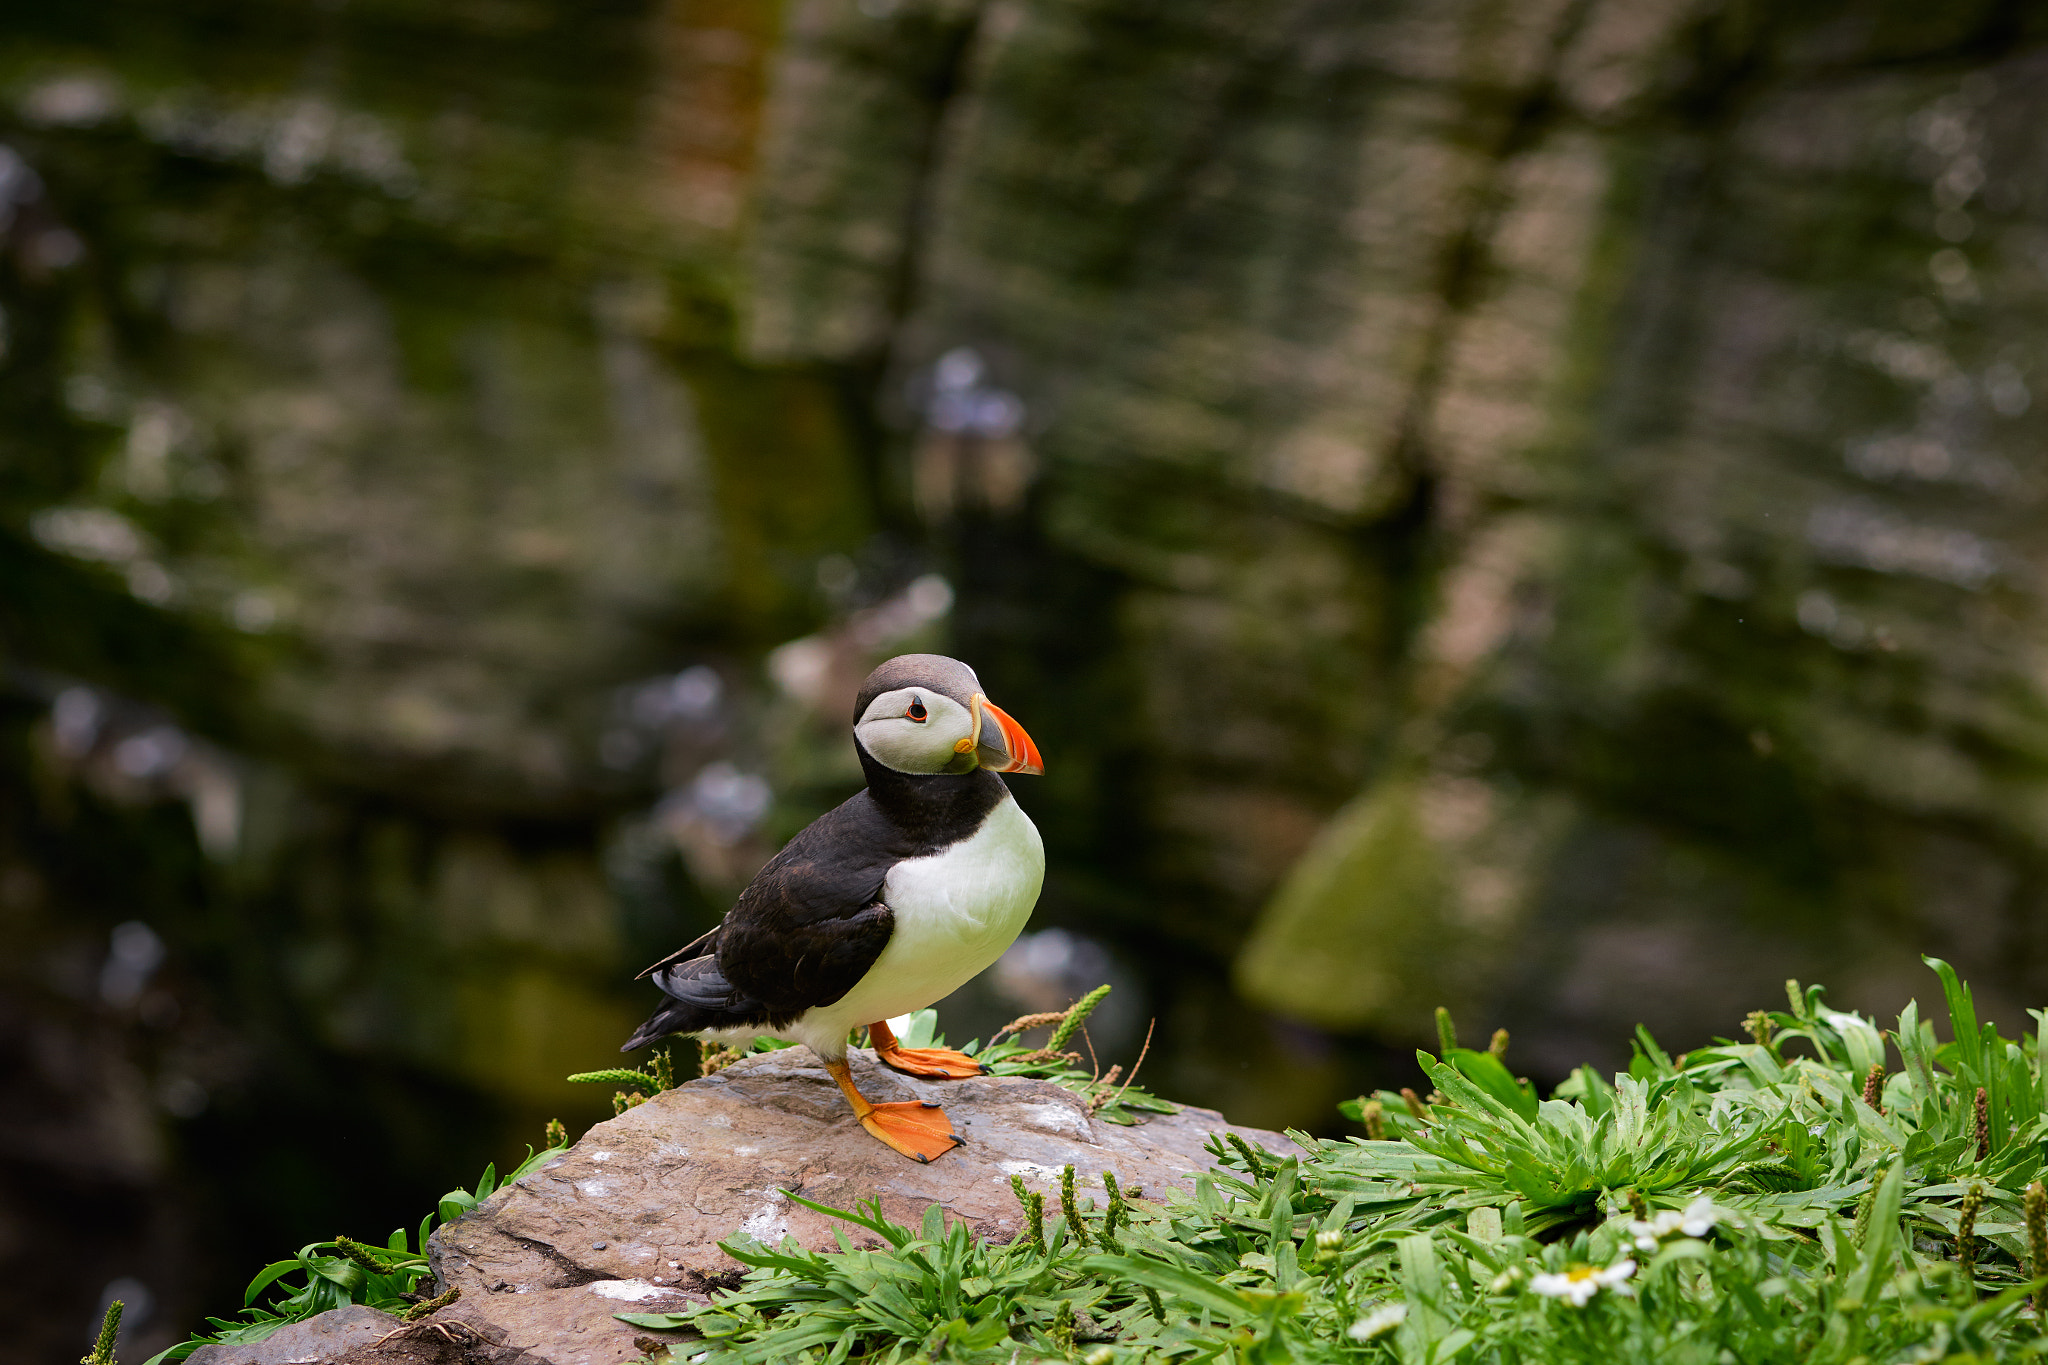 Phase One IQ3 50MP sample photo. Skellig michael puffin photography